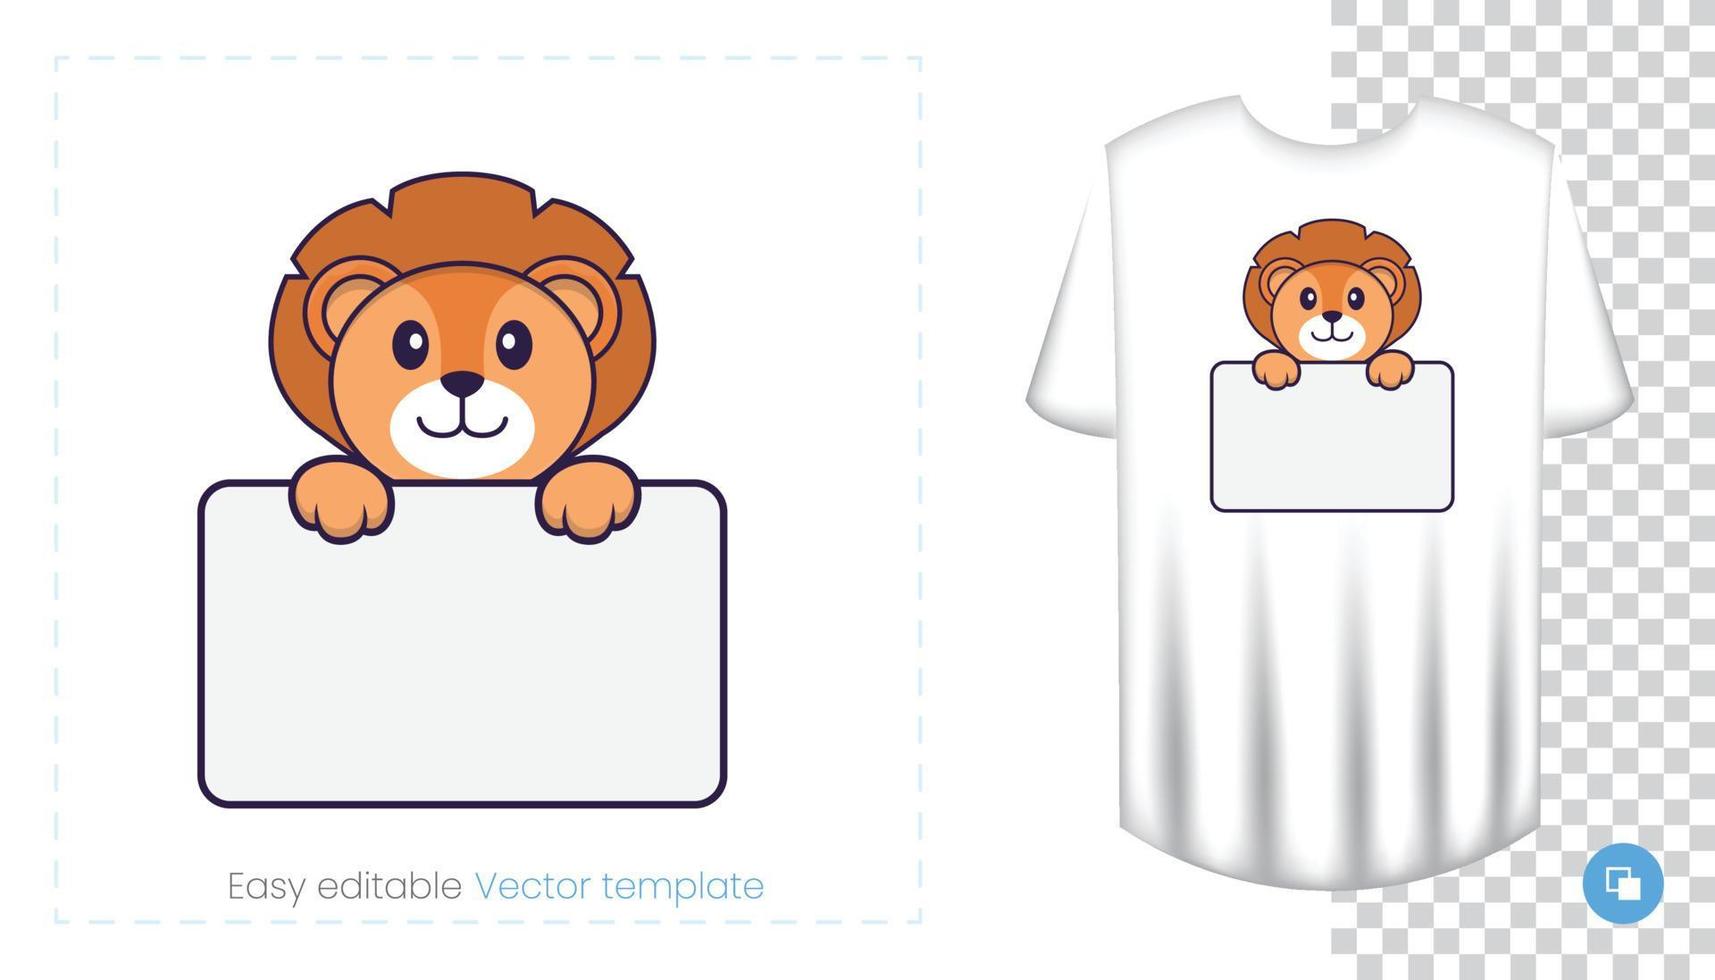 Cute lion character. Prints on T-shirts, sweatshirts, cases for mobile phones, souvenirs. Isolated vector illustration on white background.